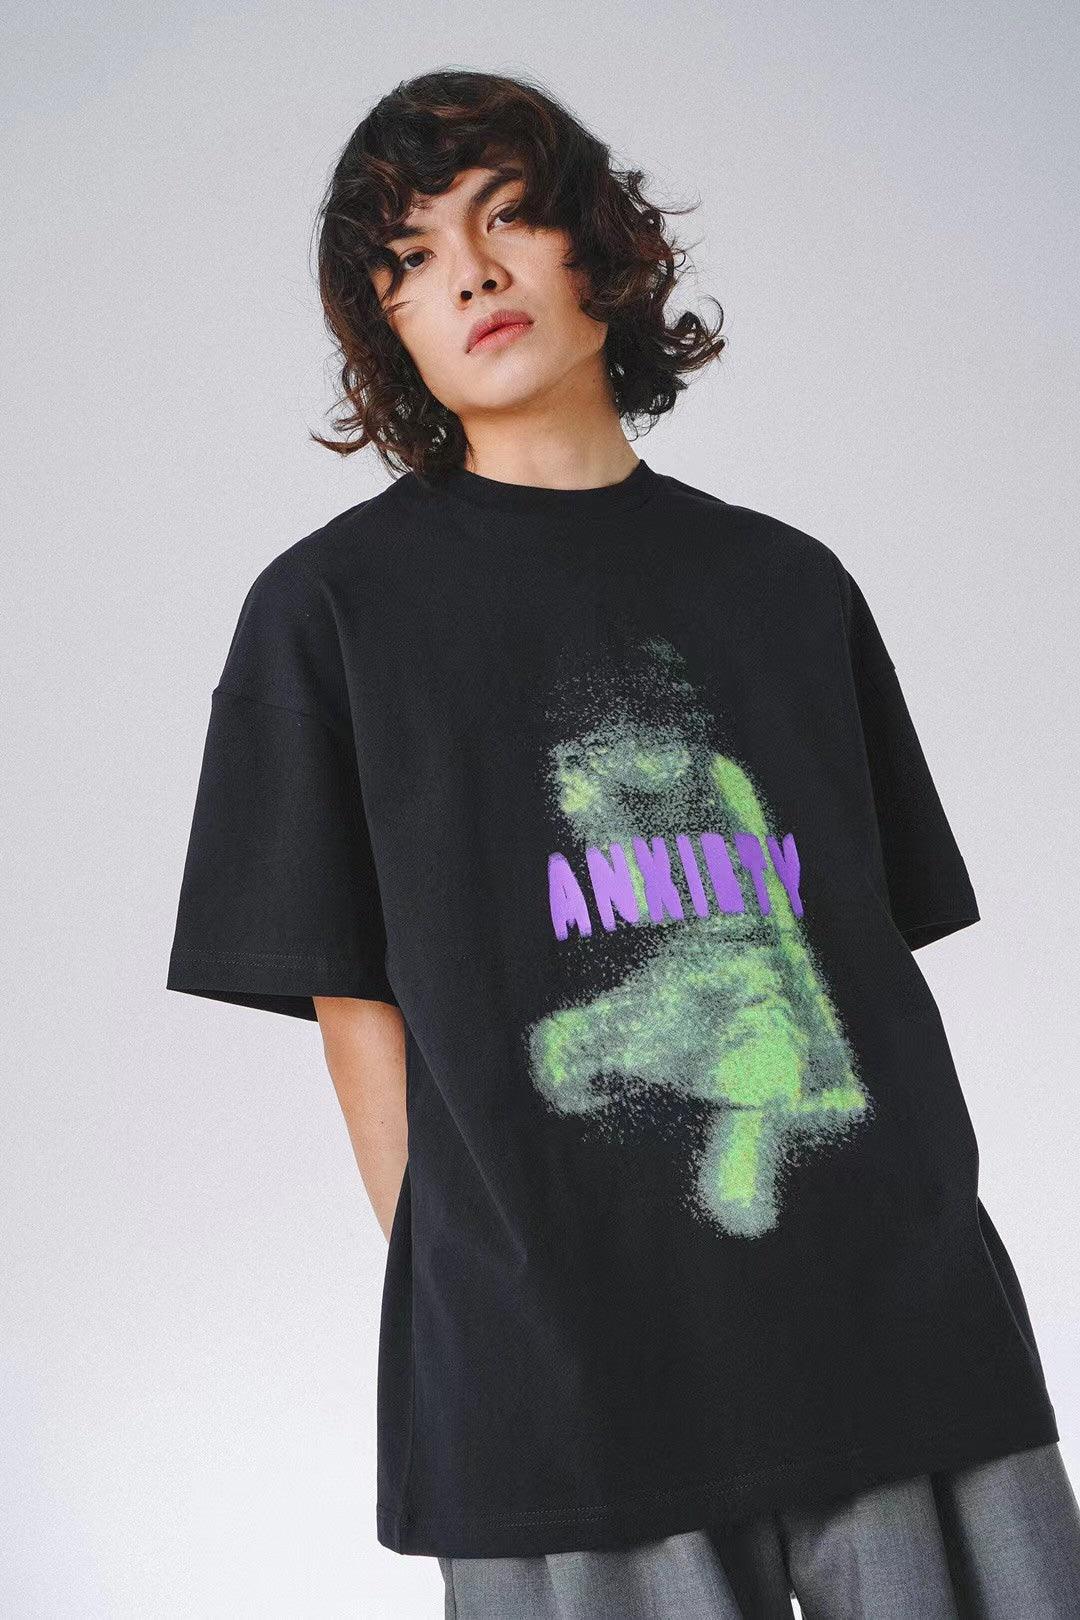 The Unavowed Anxiity Over Size T-Shirt- Black - Obeezi.com